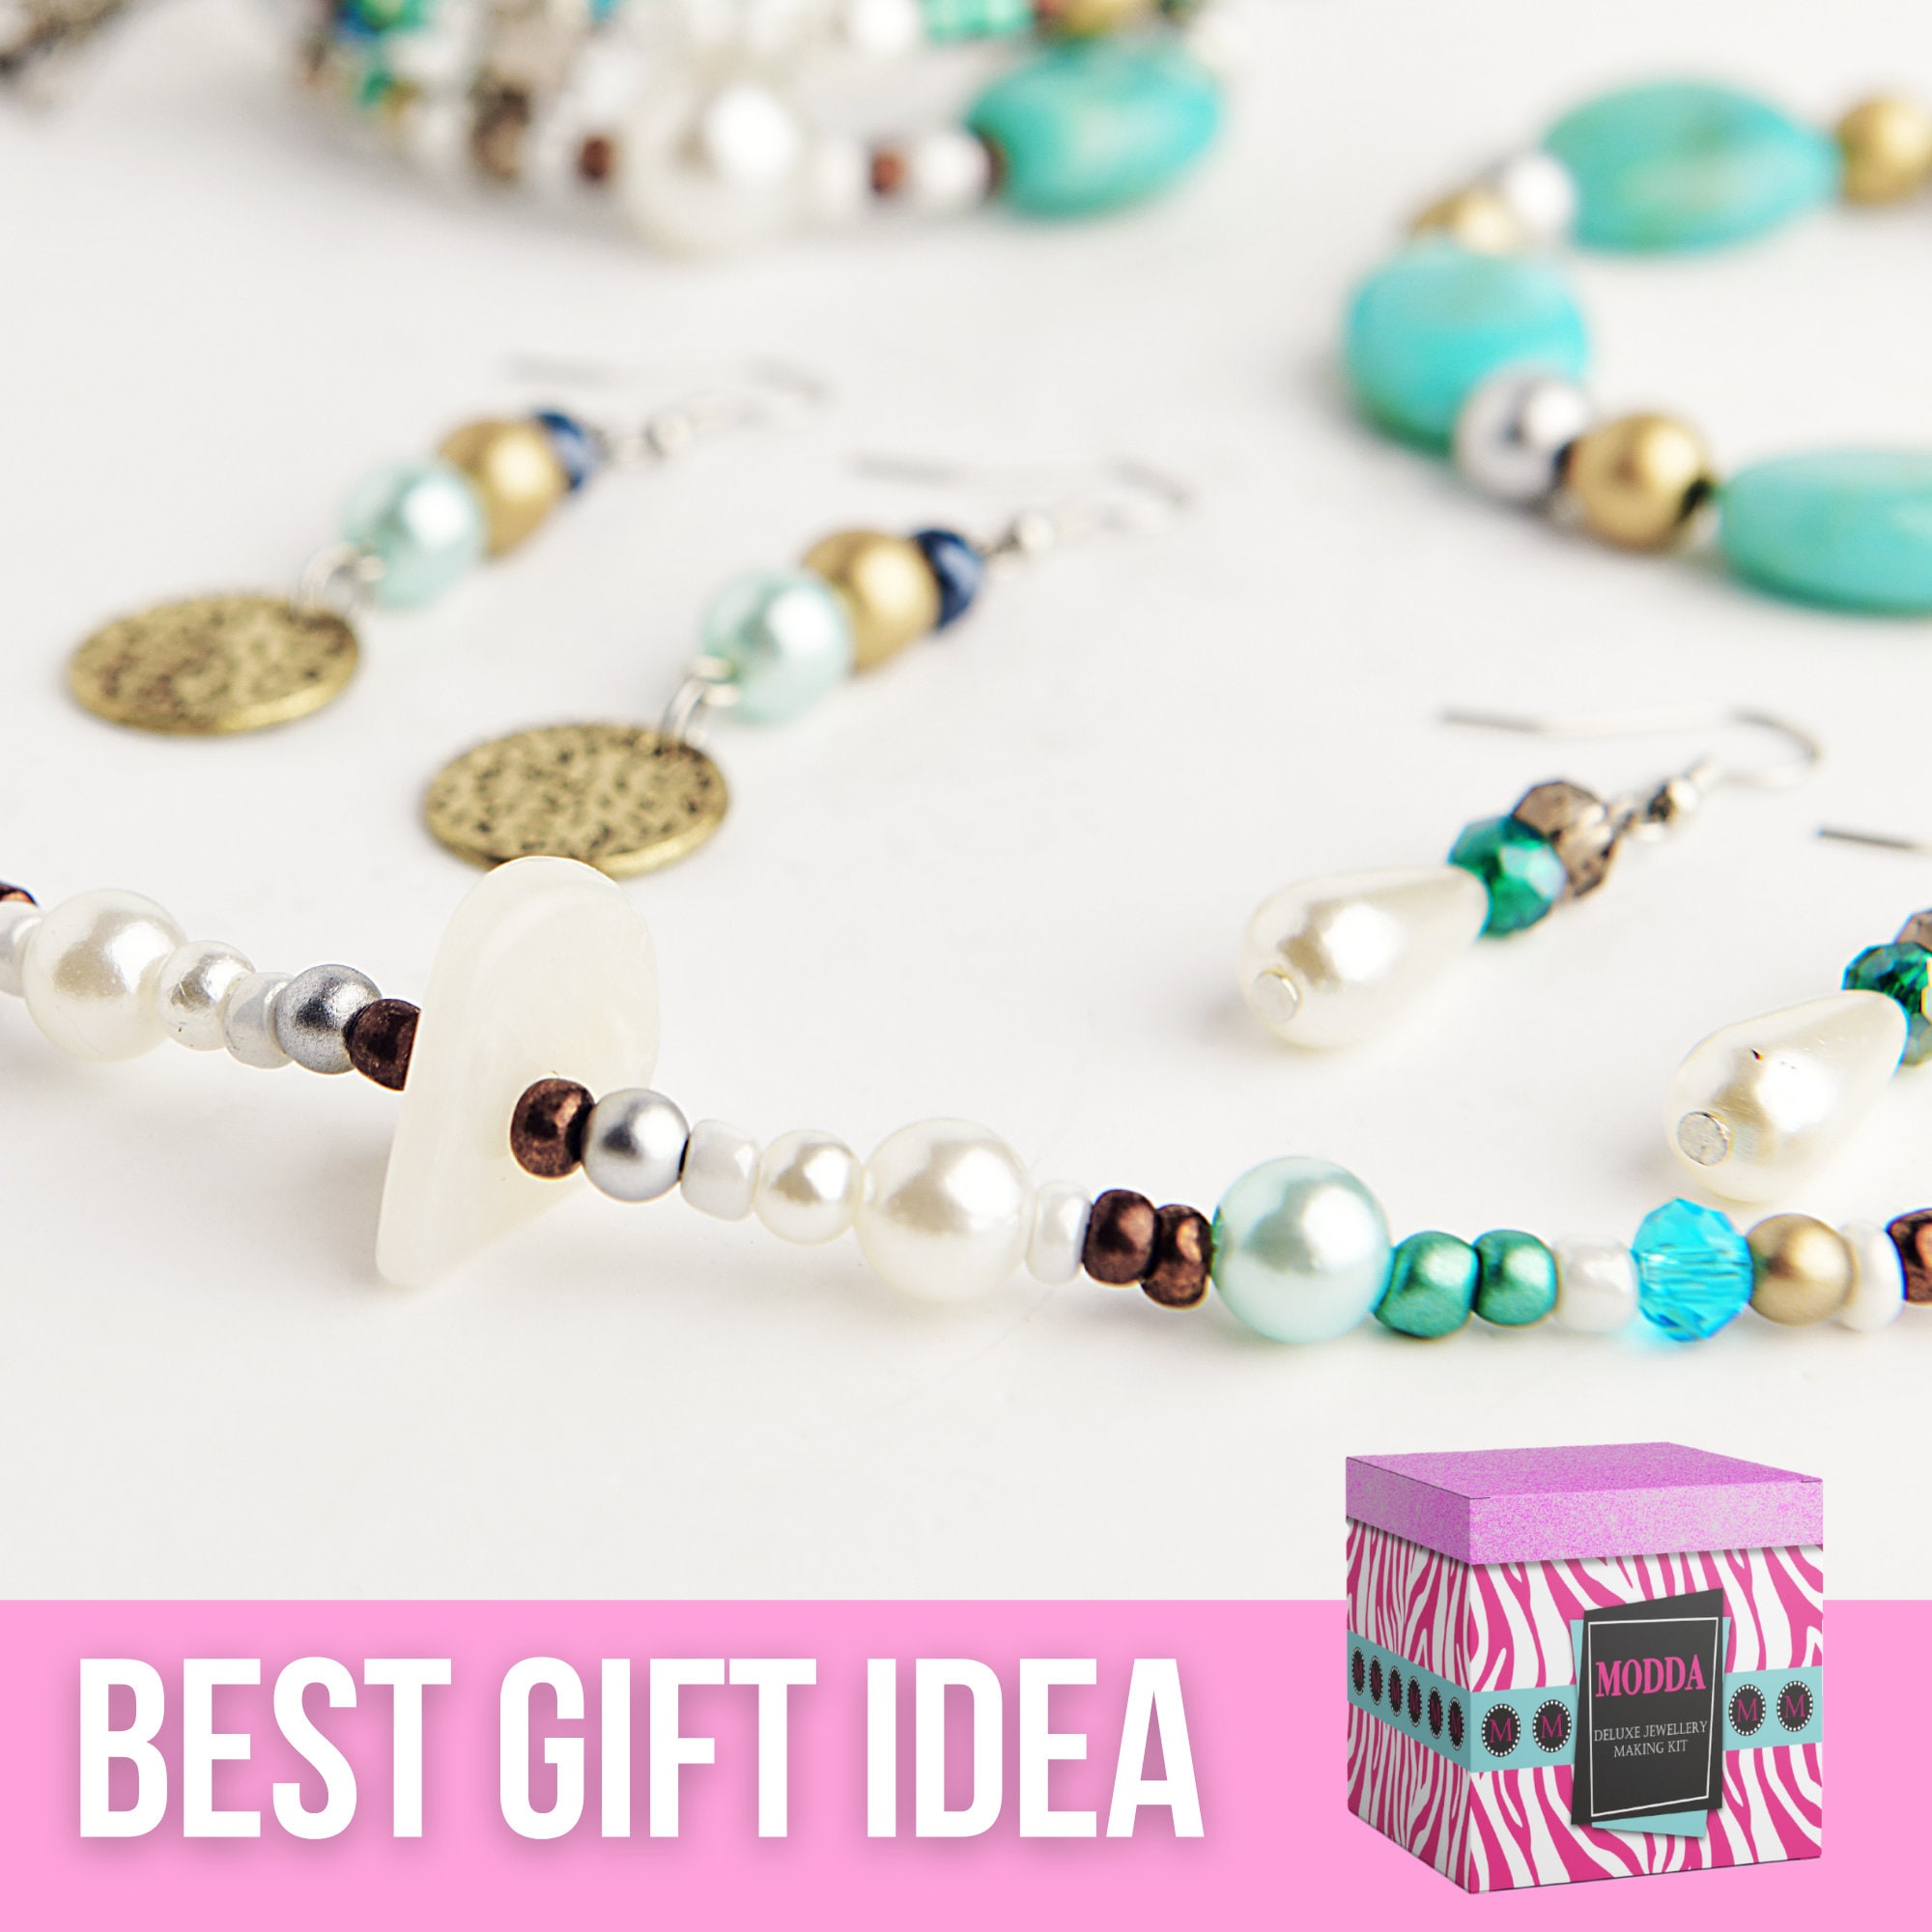 Jewellery Making Kit Online For Starters and Professionals